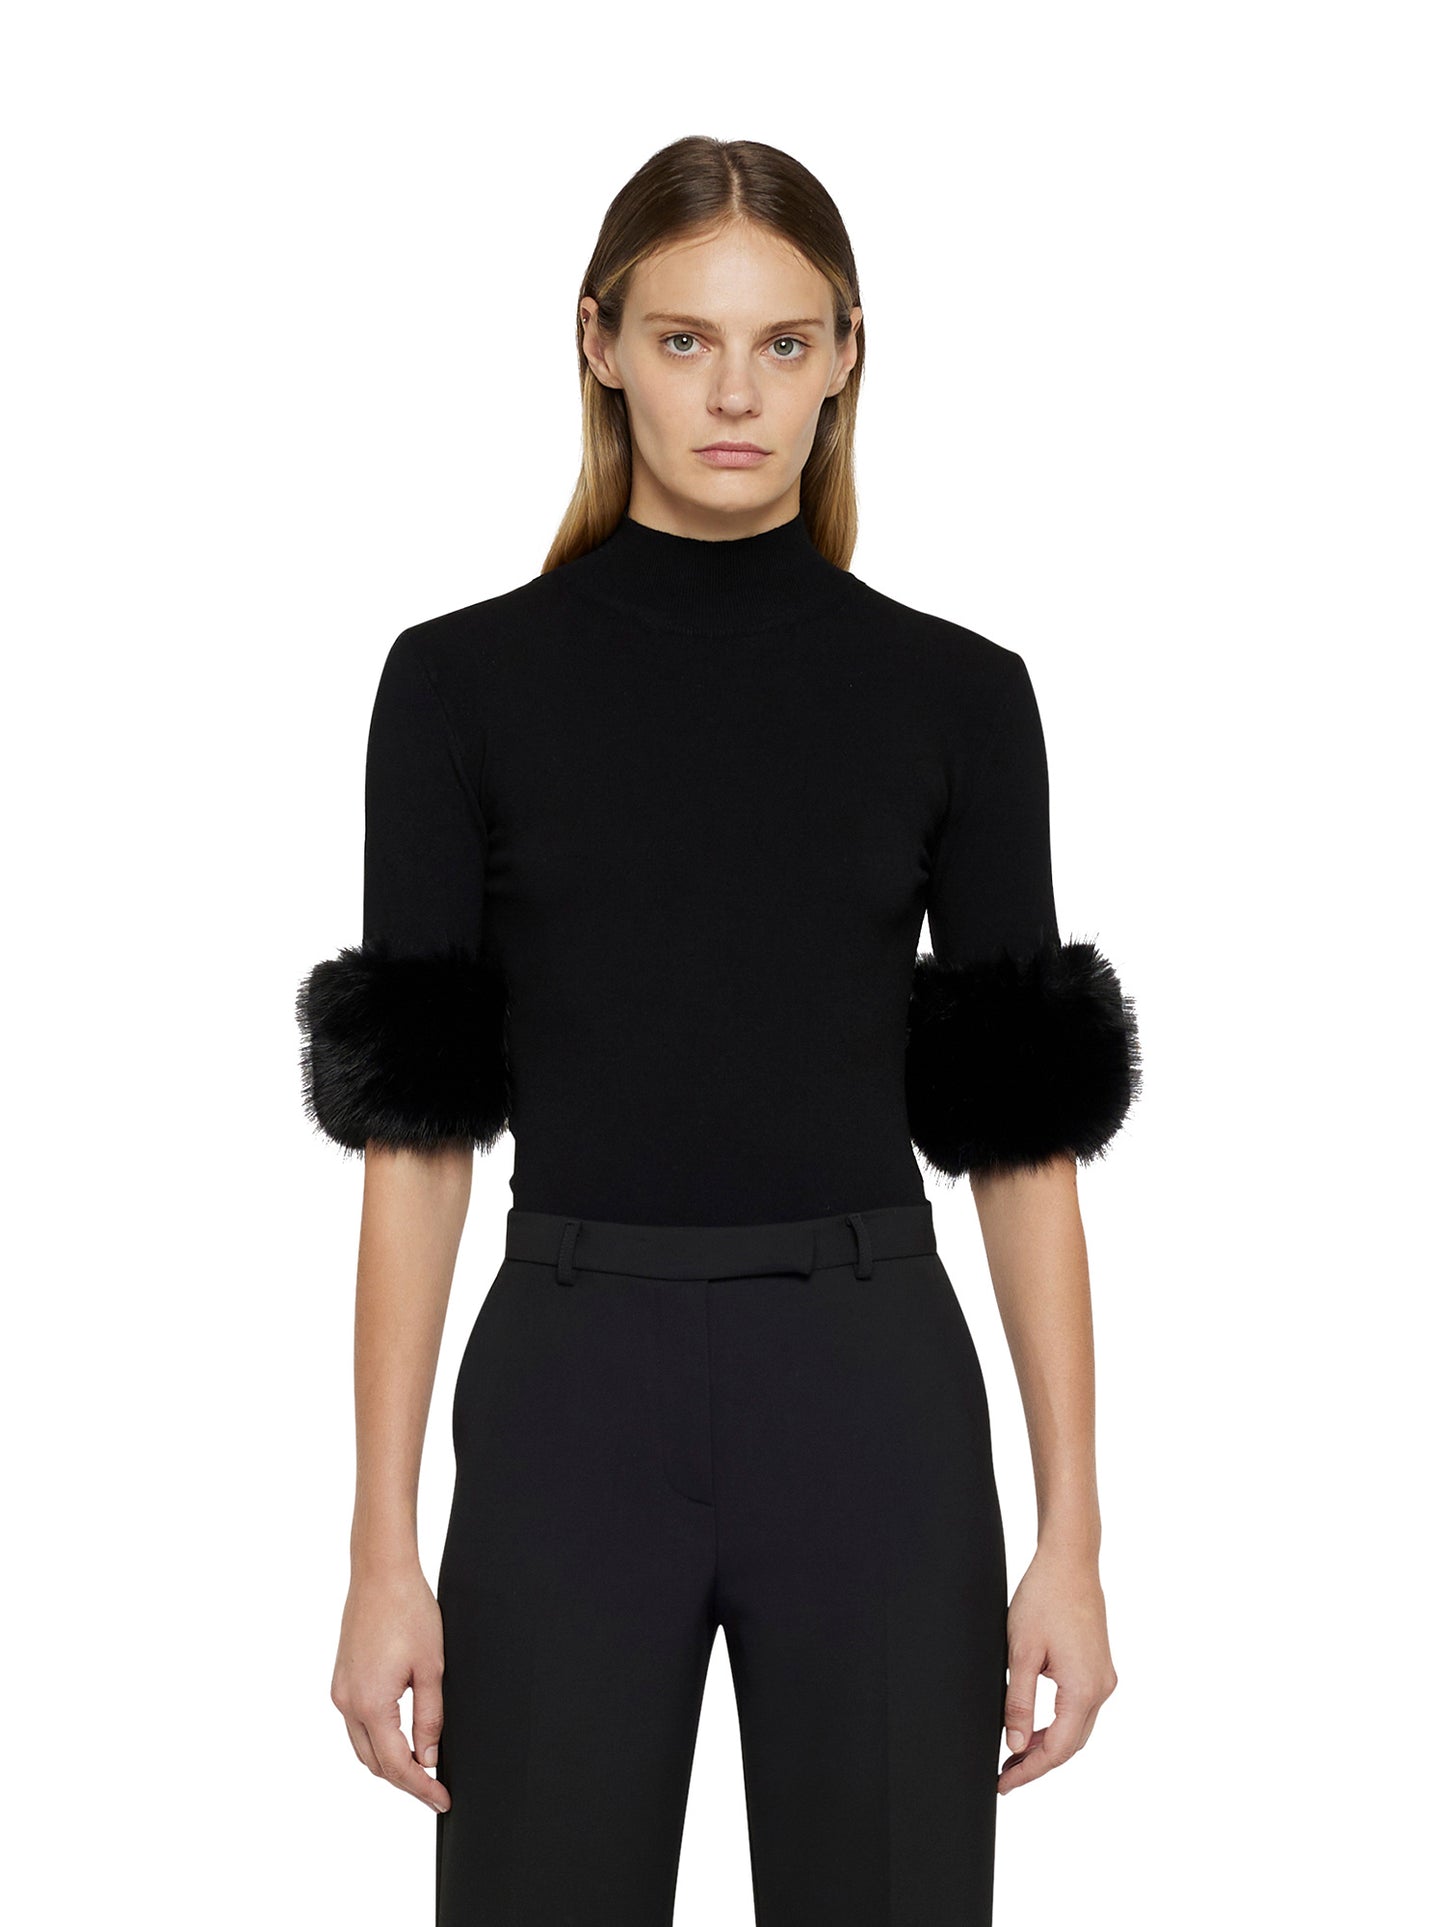 Techno viscose turtleneck jersey with short sleeves and ecofur edging